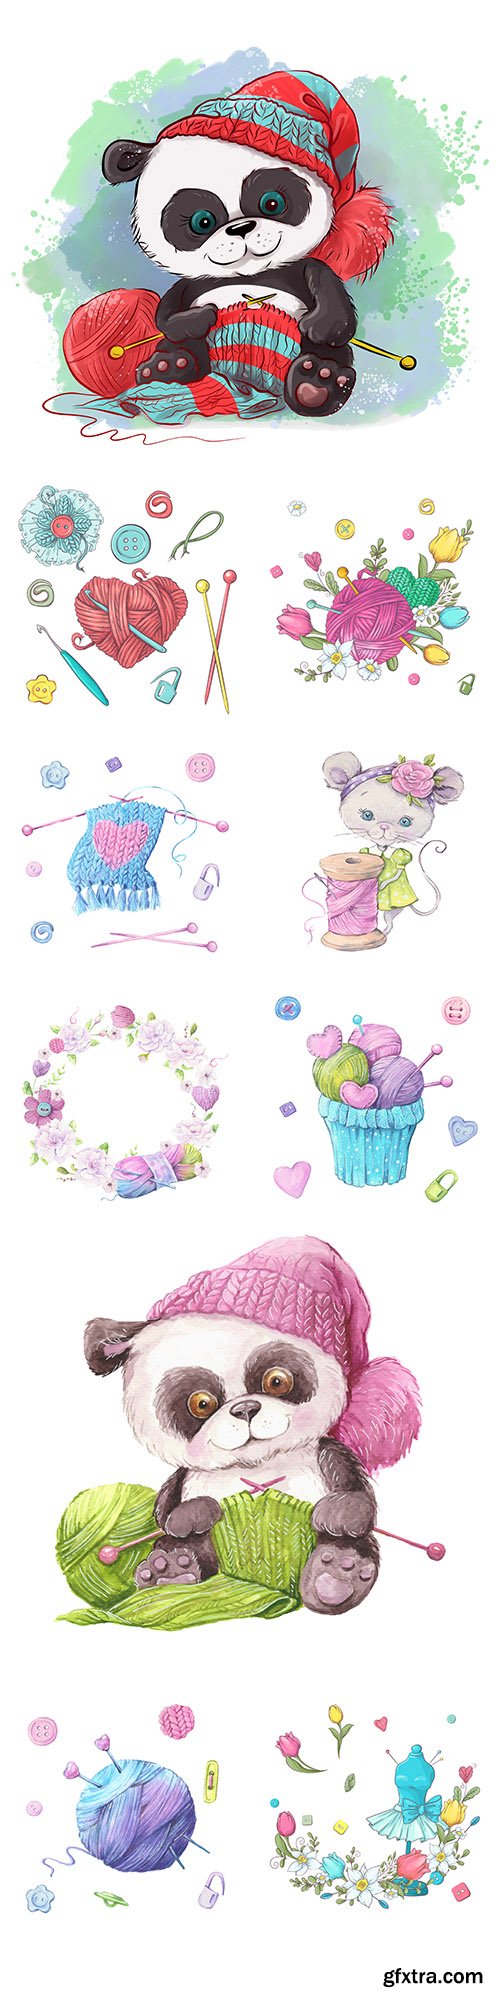 Cute animals and kit for knitting watercolor illustrations